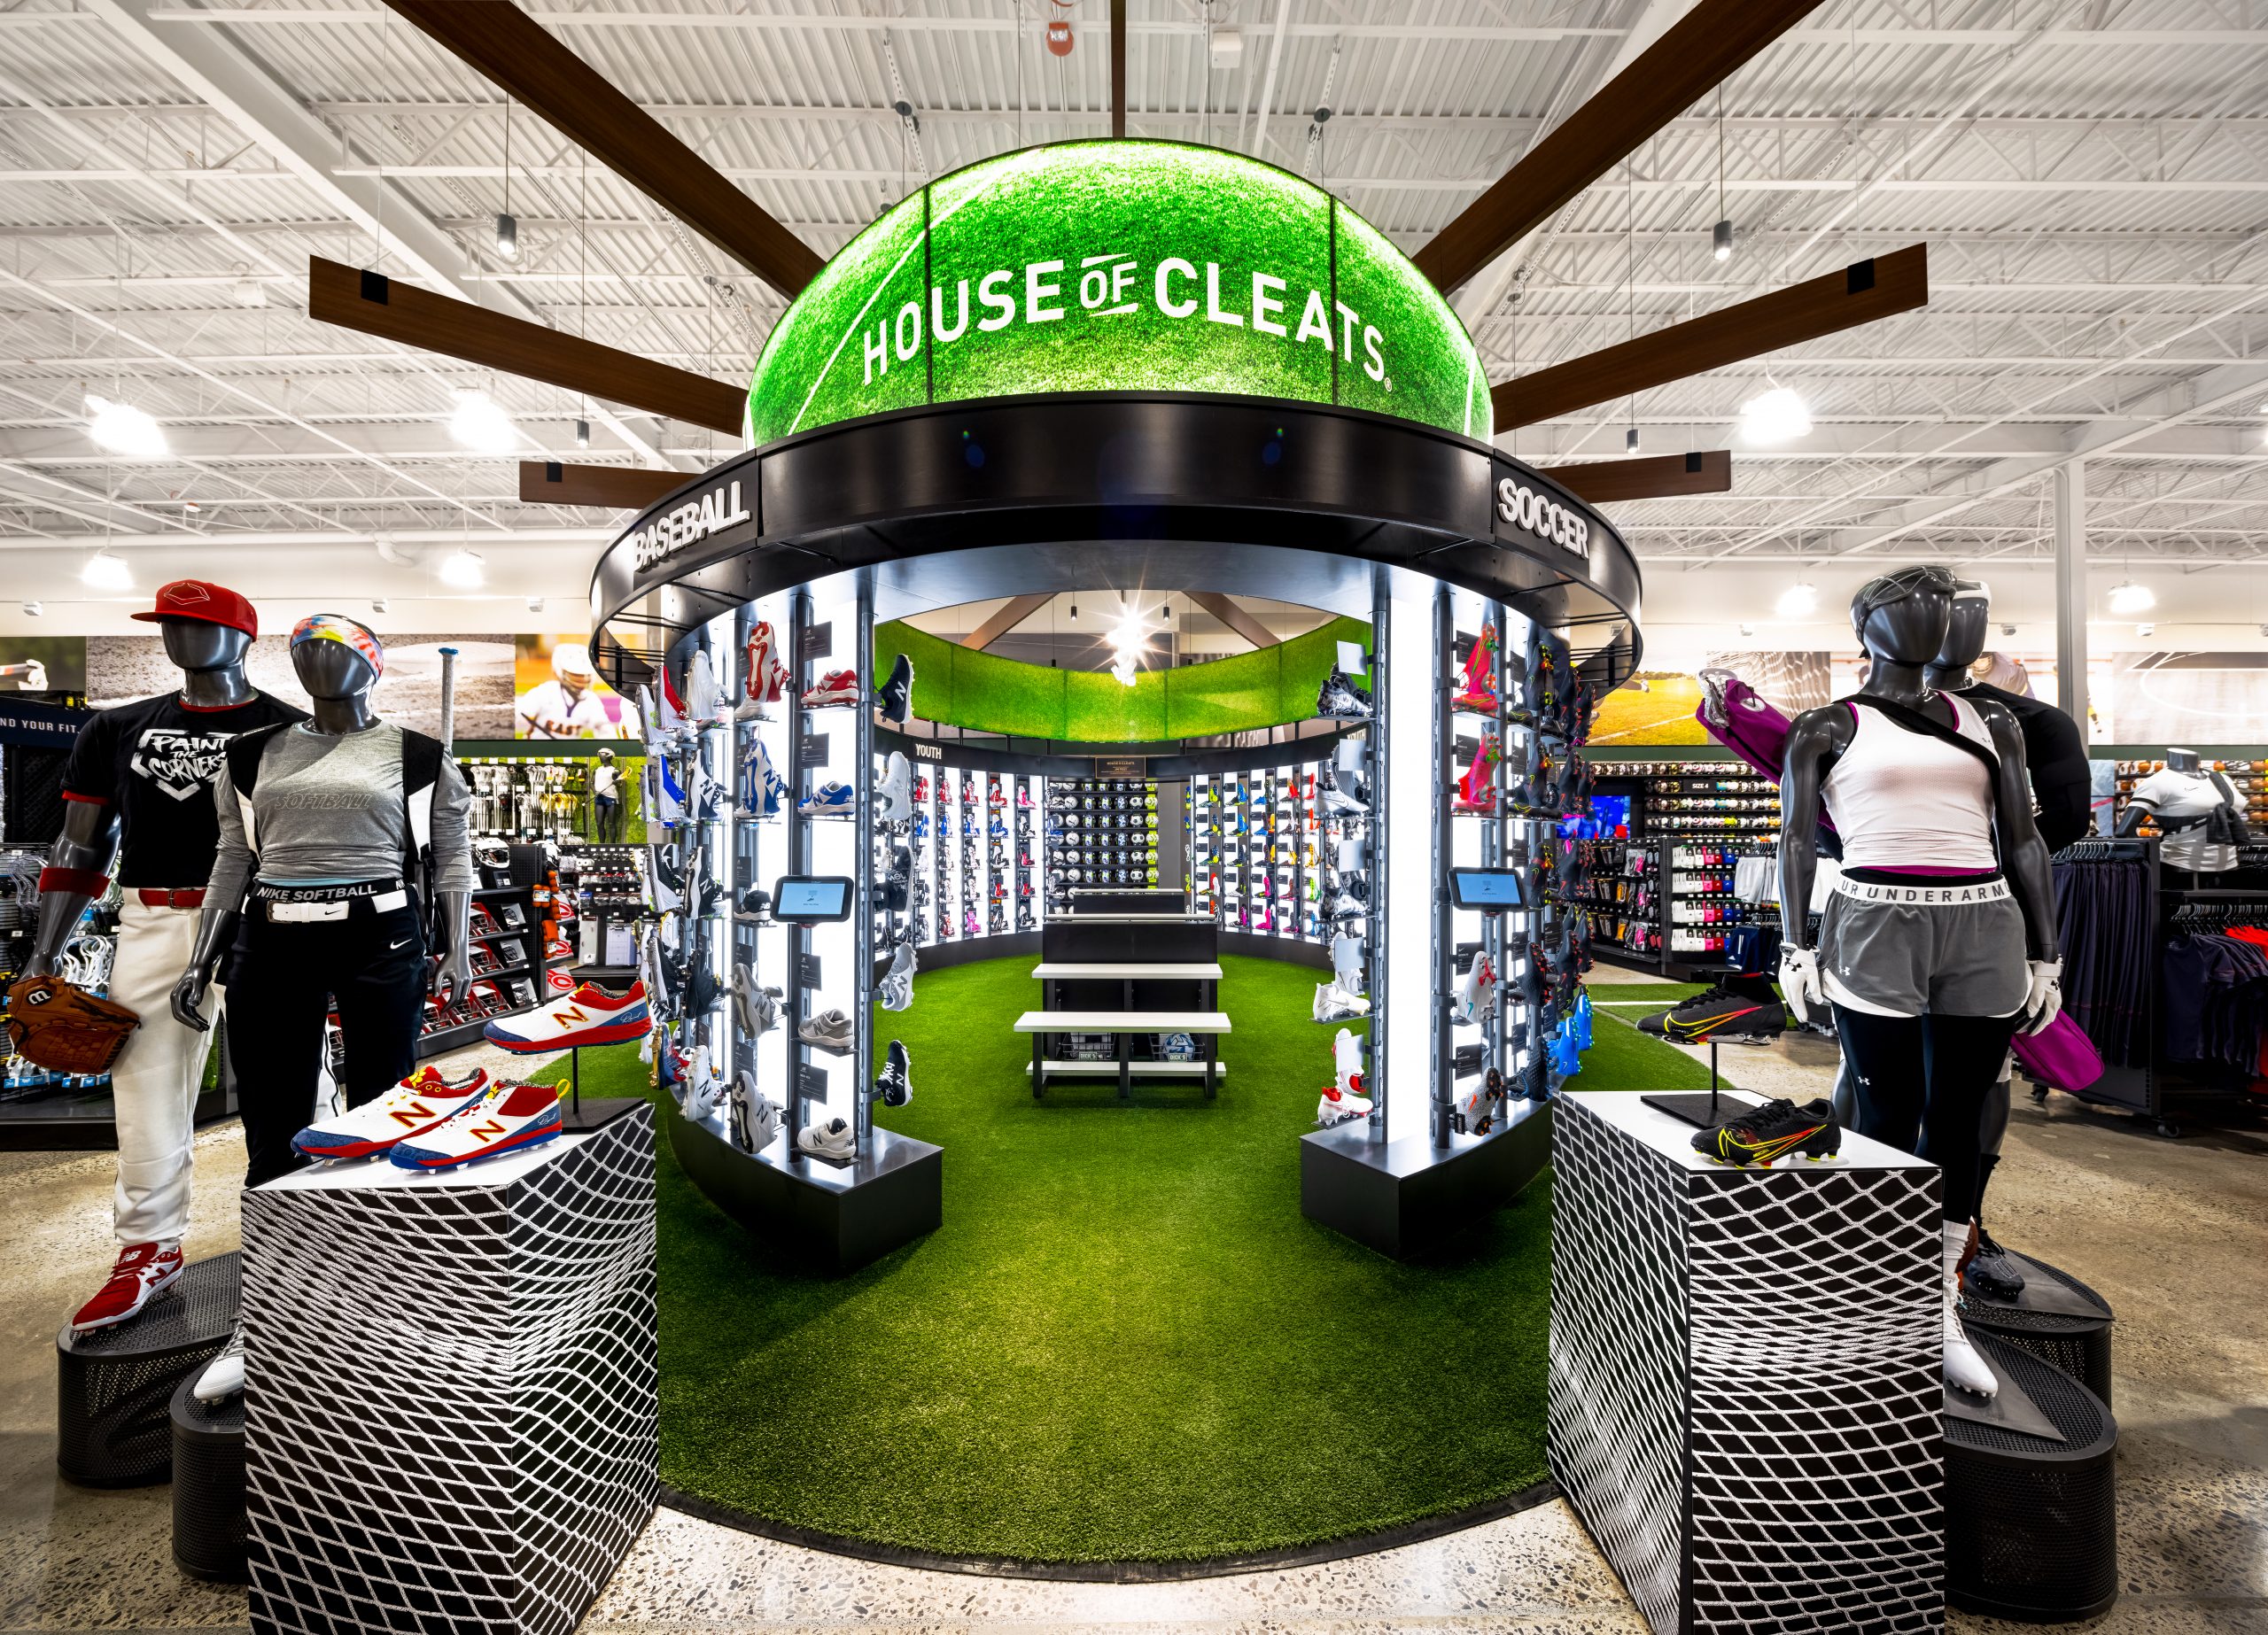 Dick's Sporting Goods Knocks It Out of the Park with “House of